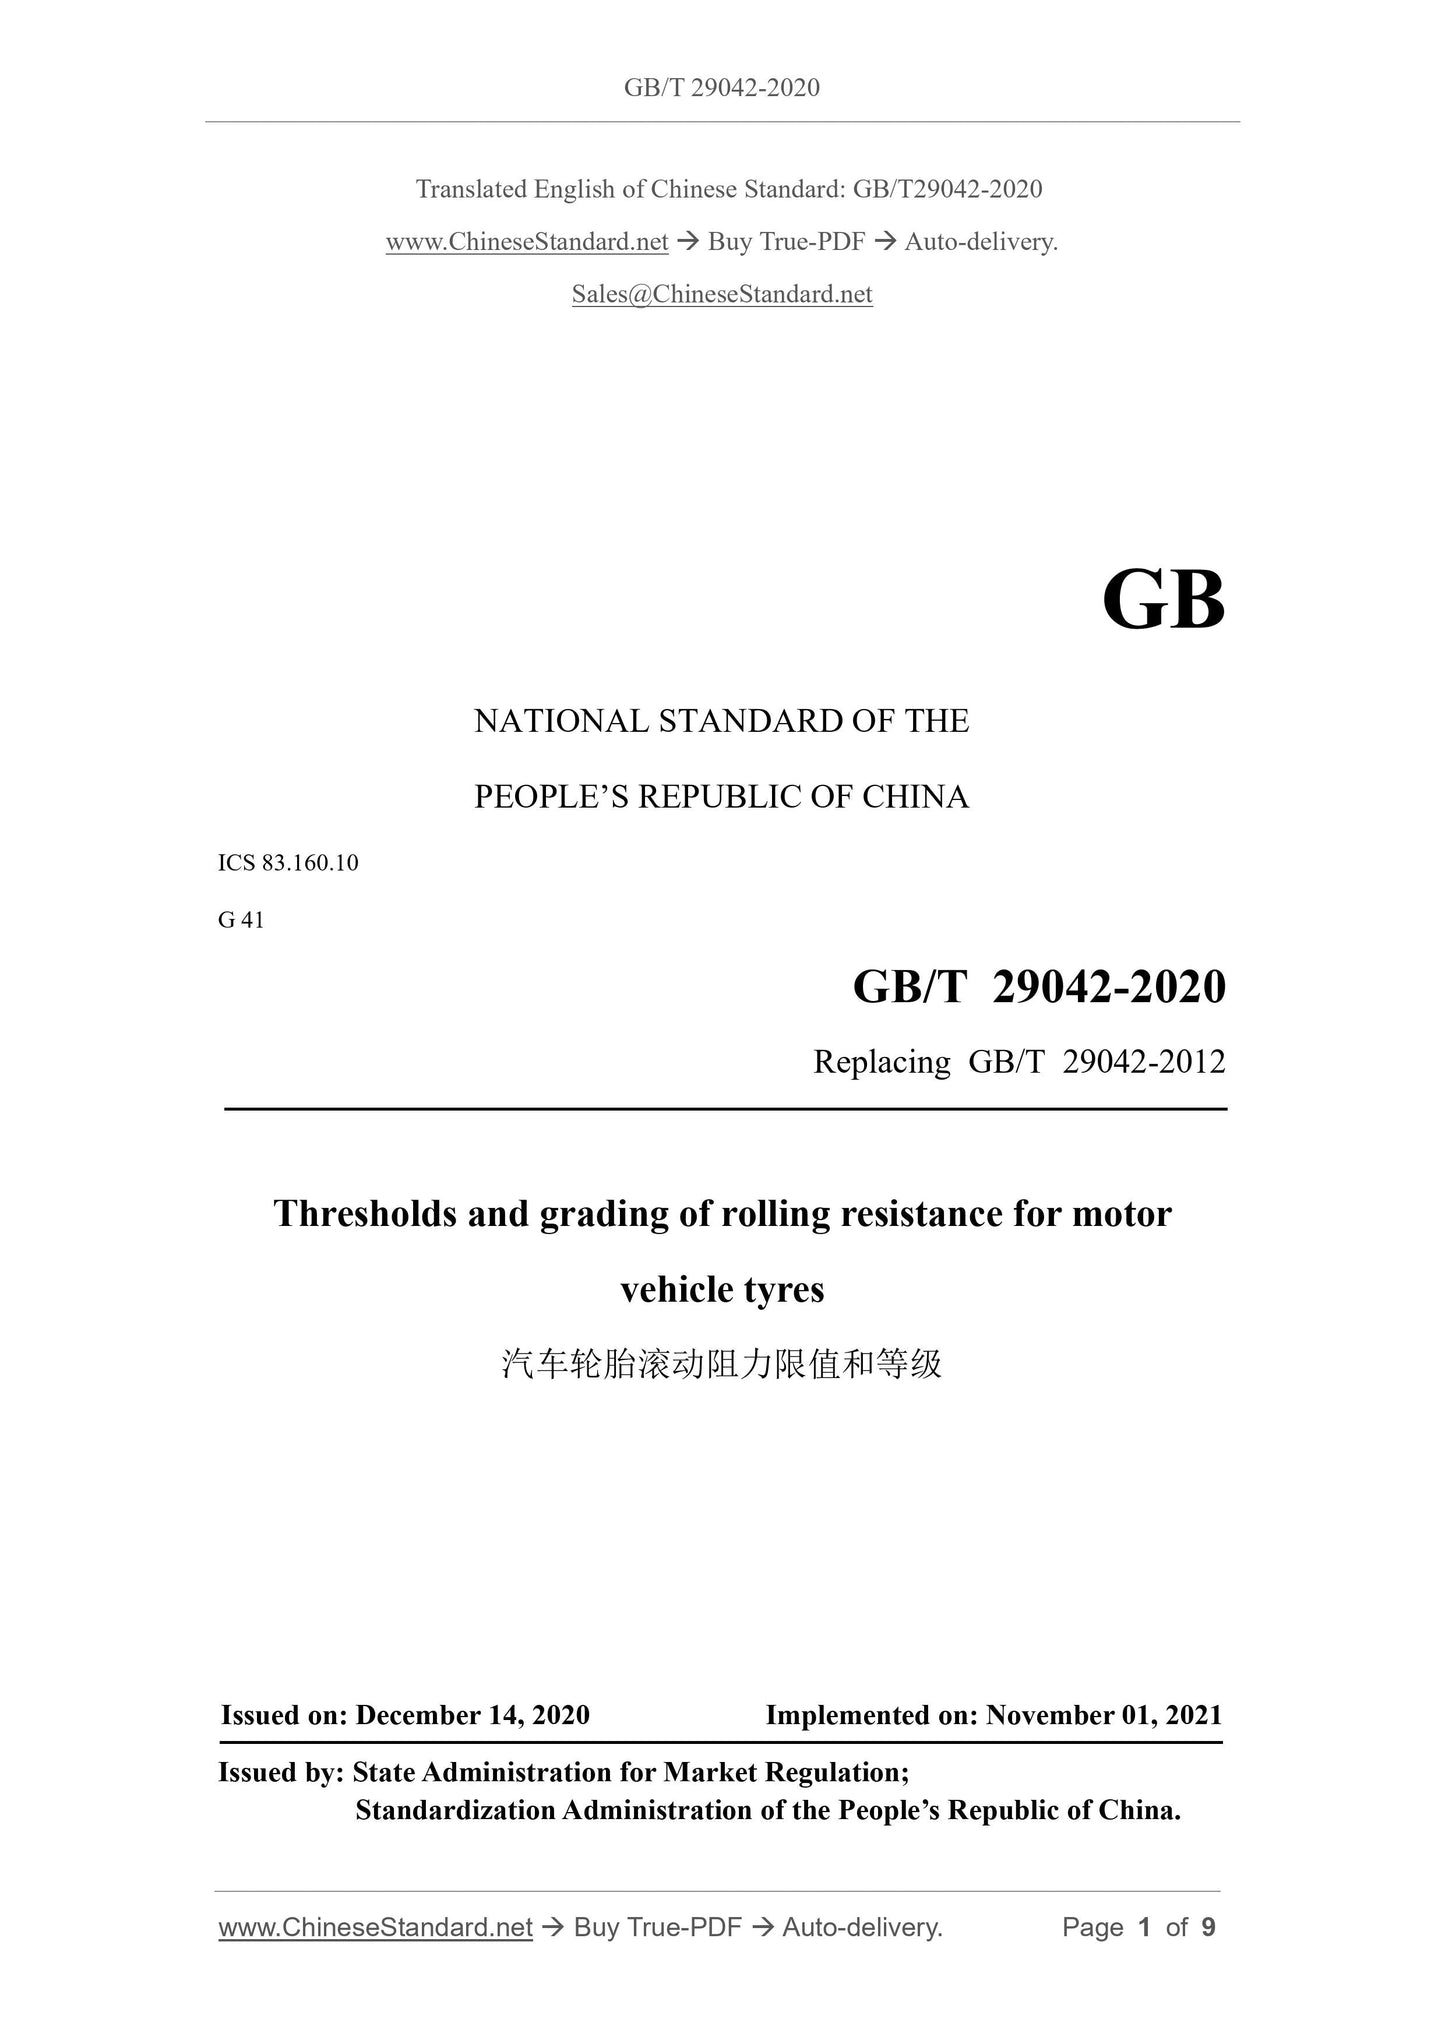 GB/T 29042-2020 Page 1